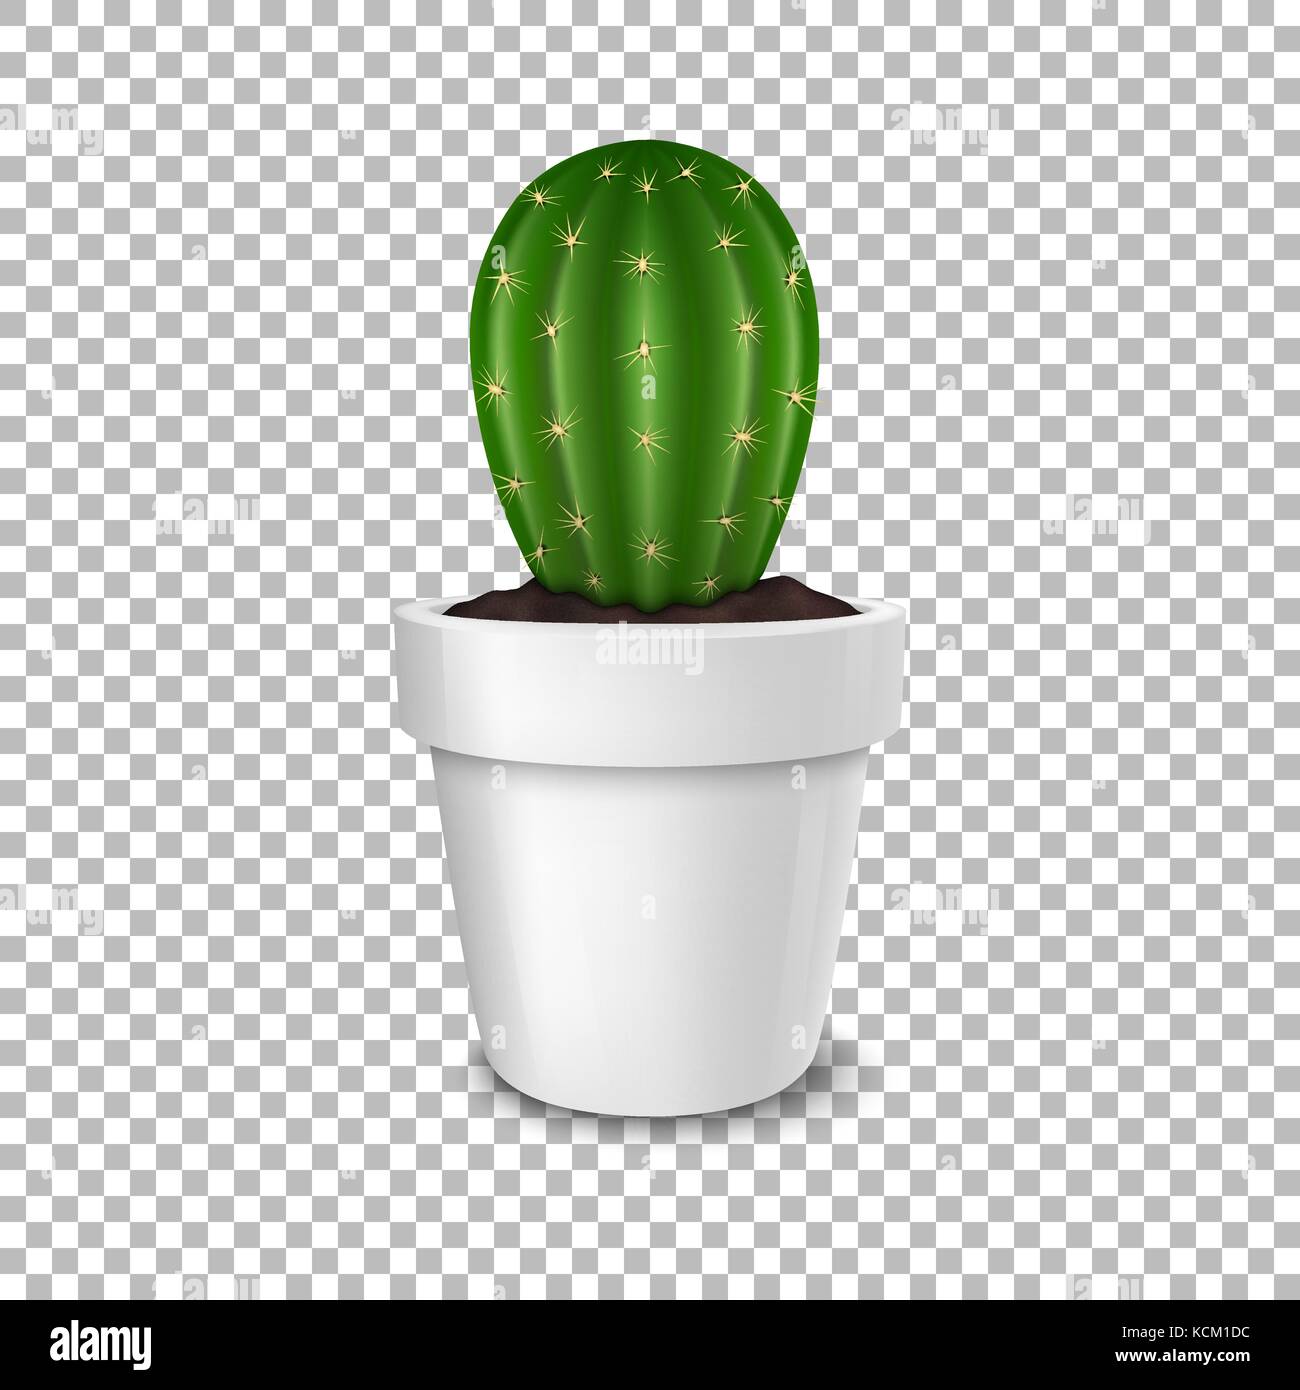 Download Realistic Decorative Cactus Plant In White Flower Pot Icon Closeup Stock Vector Image Art Alamy PSD Mockup Templates